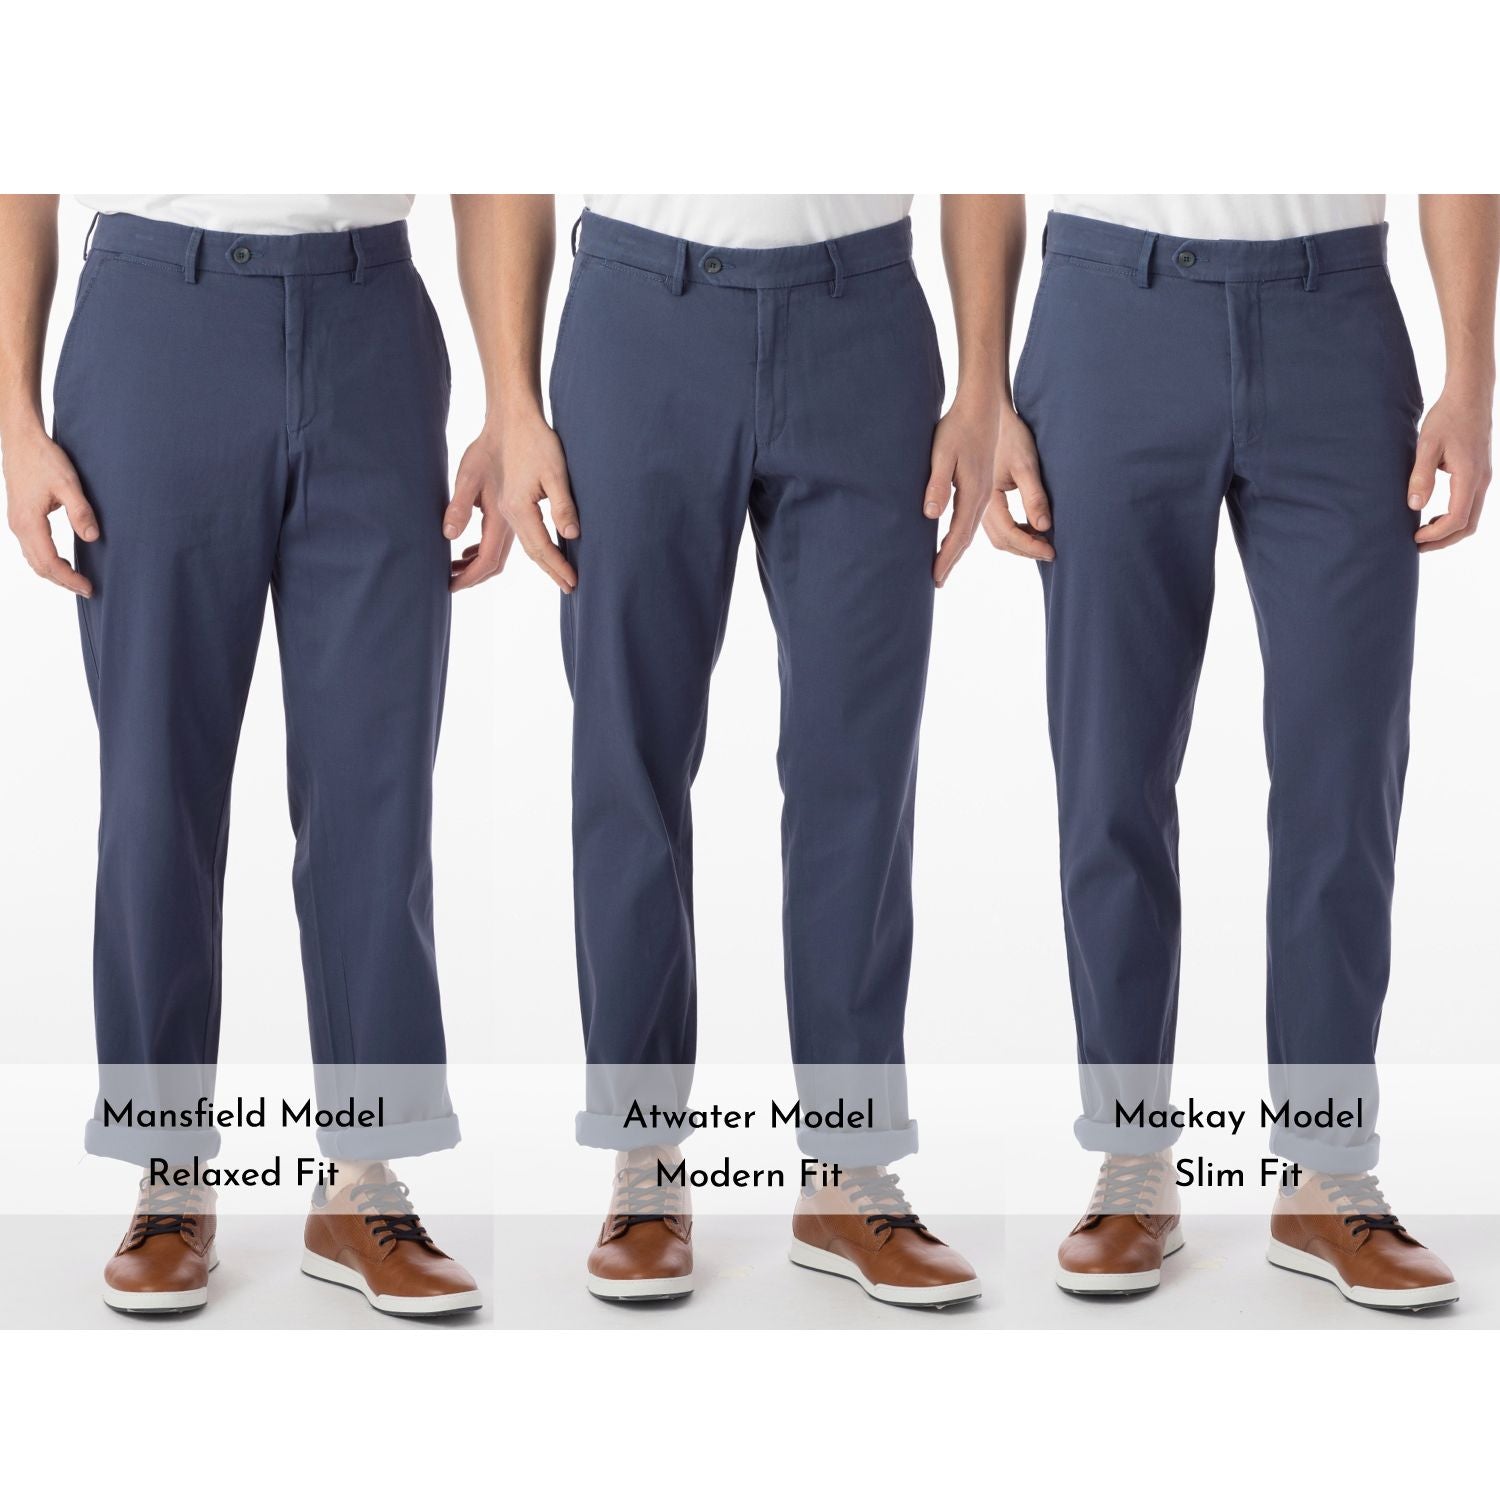 Perma Color Pima Twill Khaki Pants in Cadet Blue (Flat Front Models) by Ballin